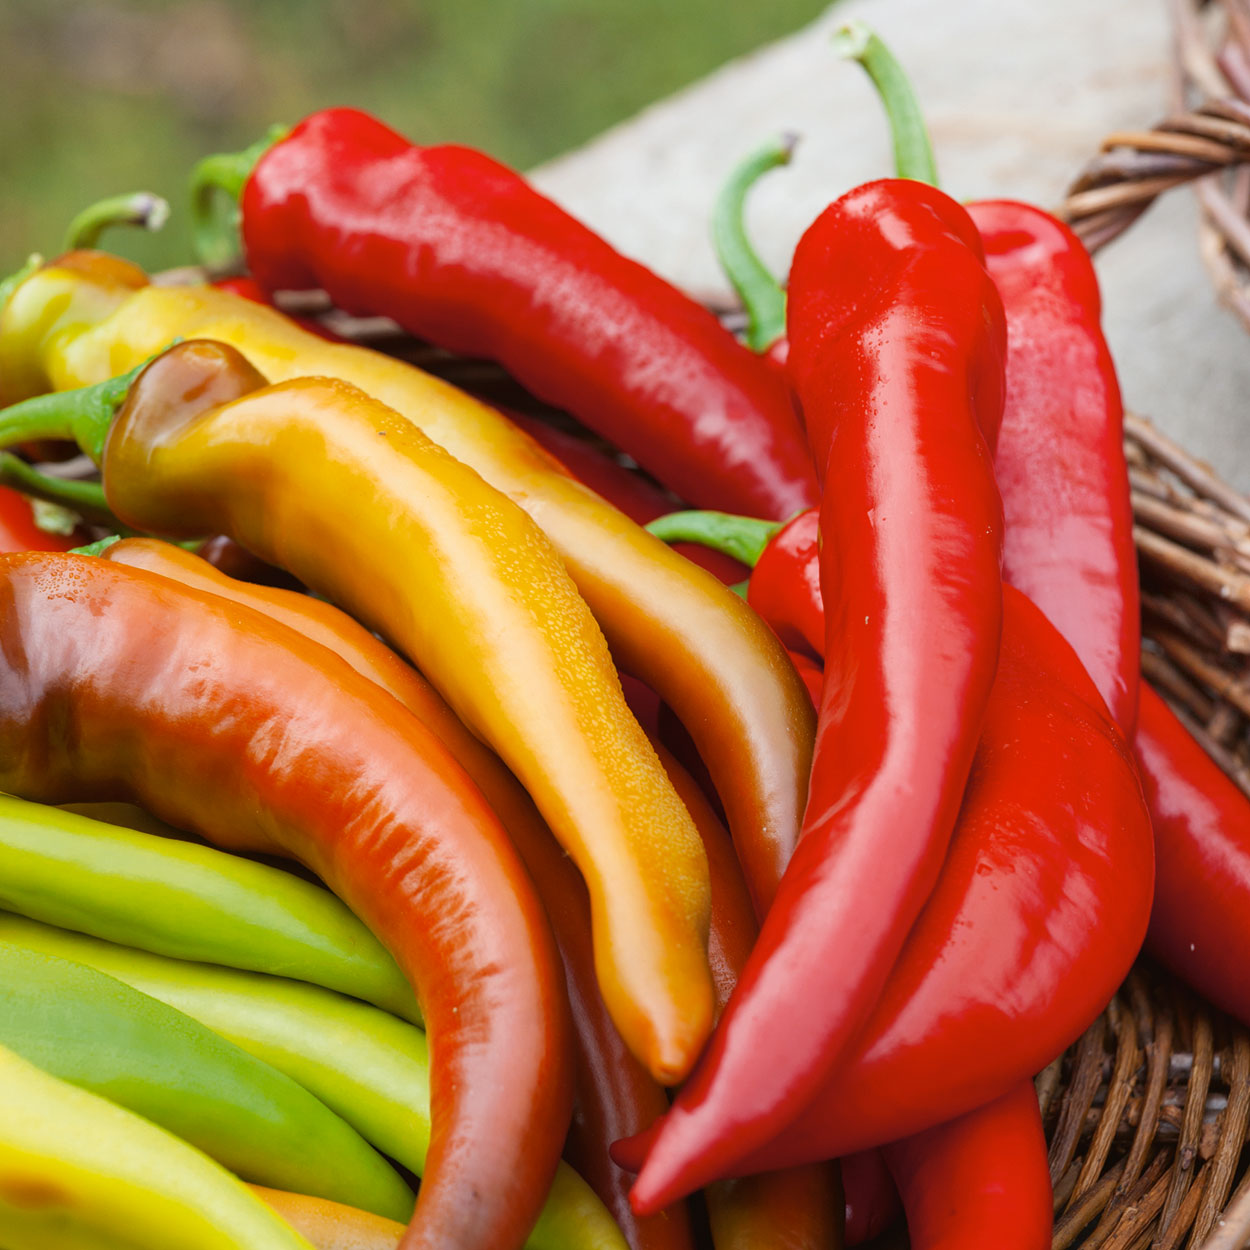 Variety of long, skinny peppers in a basket with colors ranging from yellow to red.